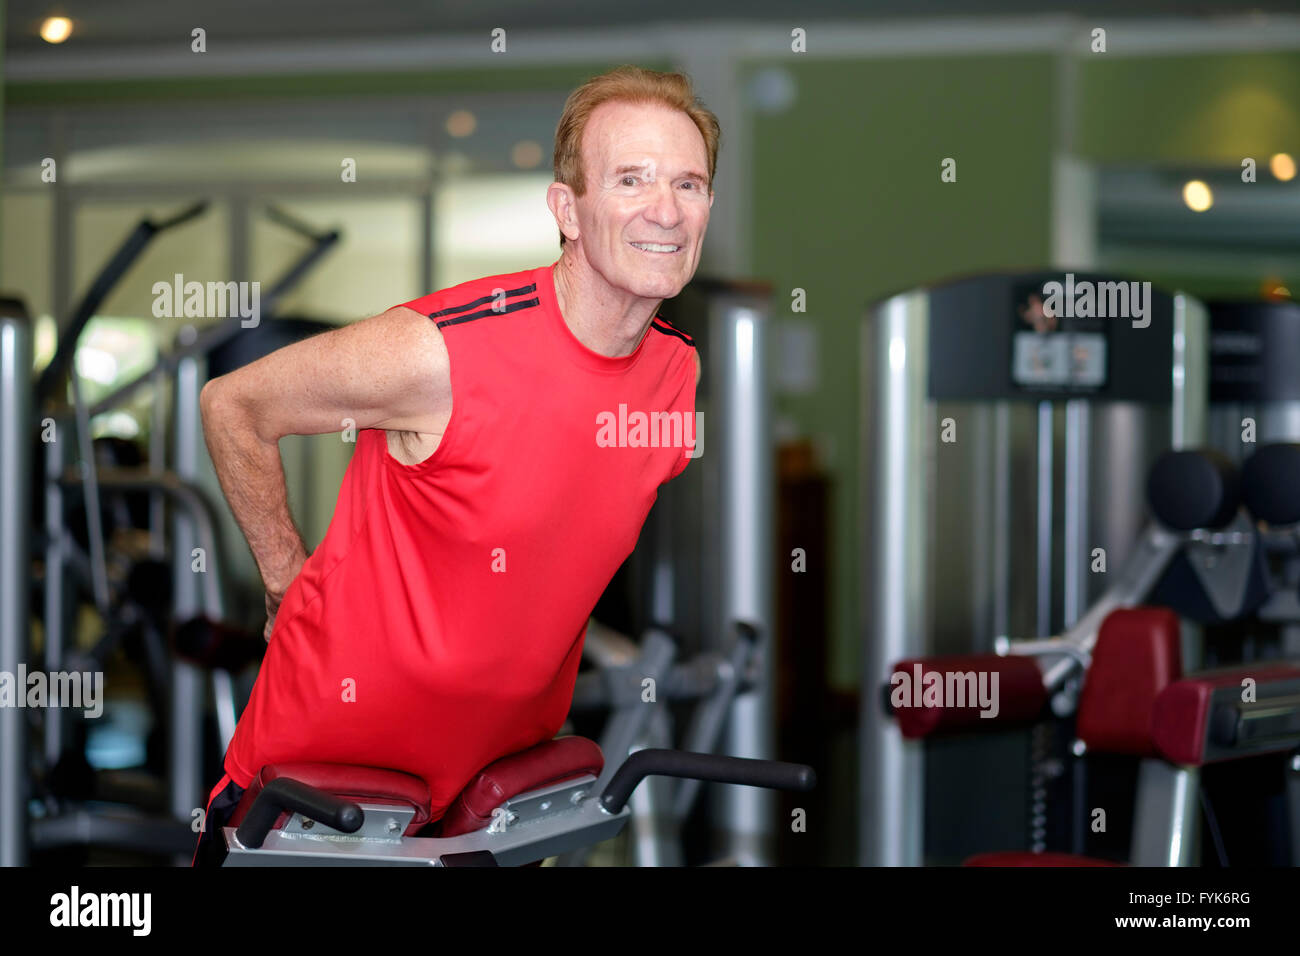 Senior citizen man working out at a gym Stock Photo